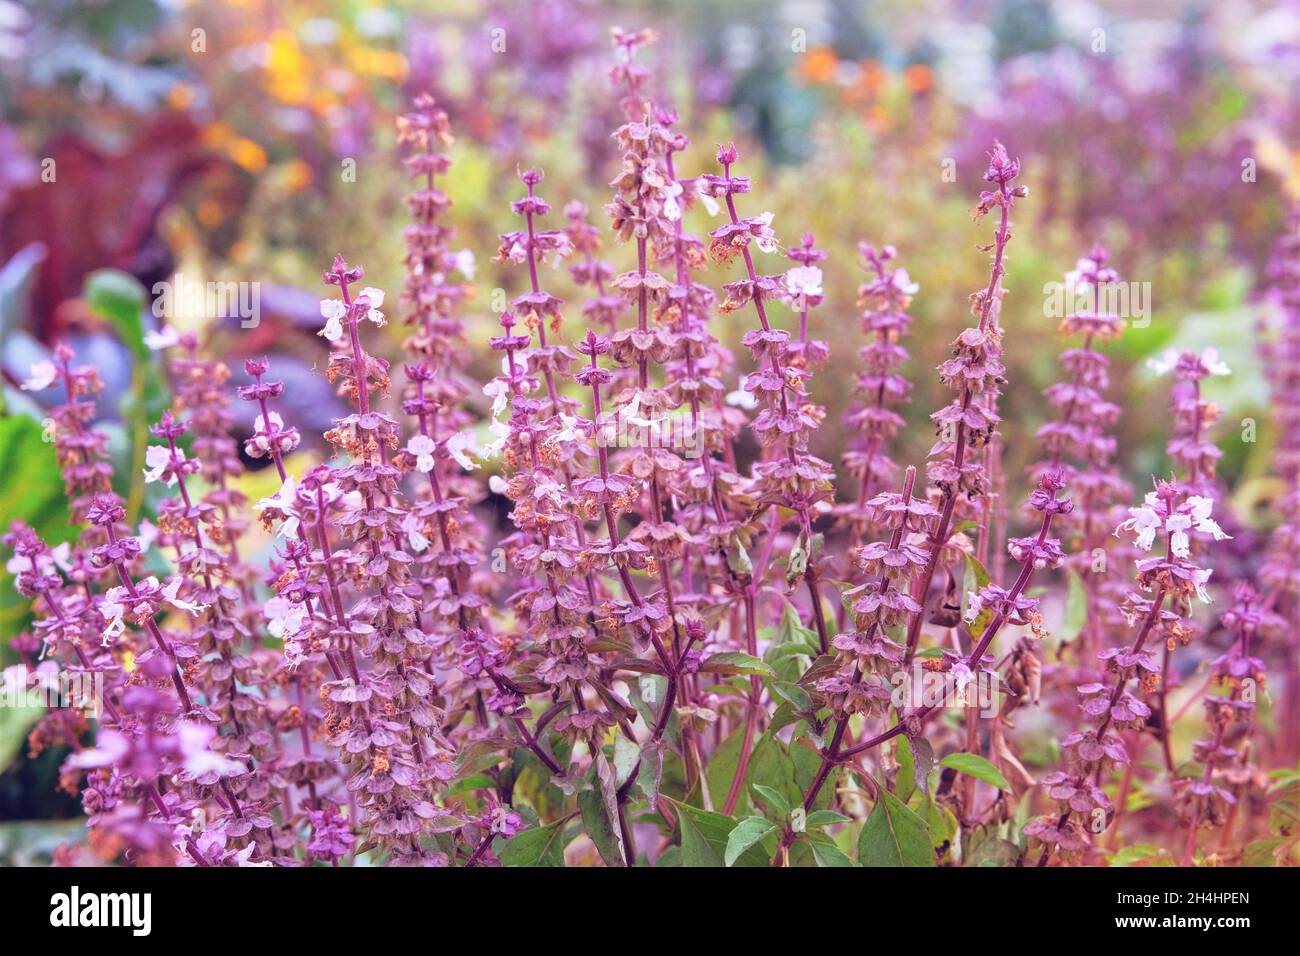 Salvia of violet color. Purple summer flowers in a rustic farm garden. Medicinal herb. Close up. Stock Photo